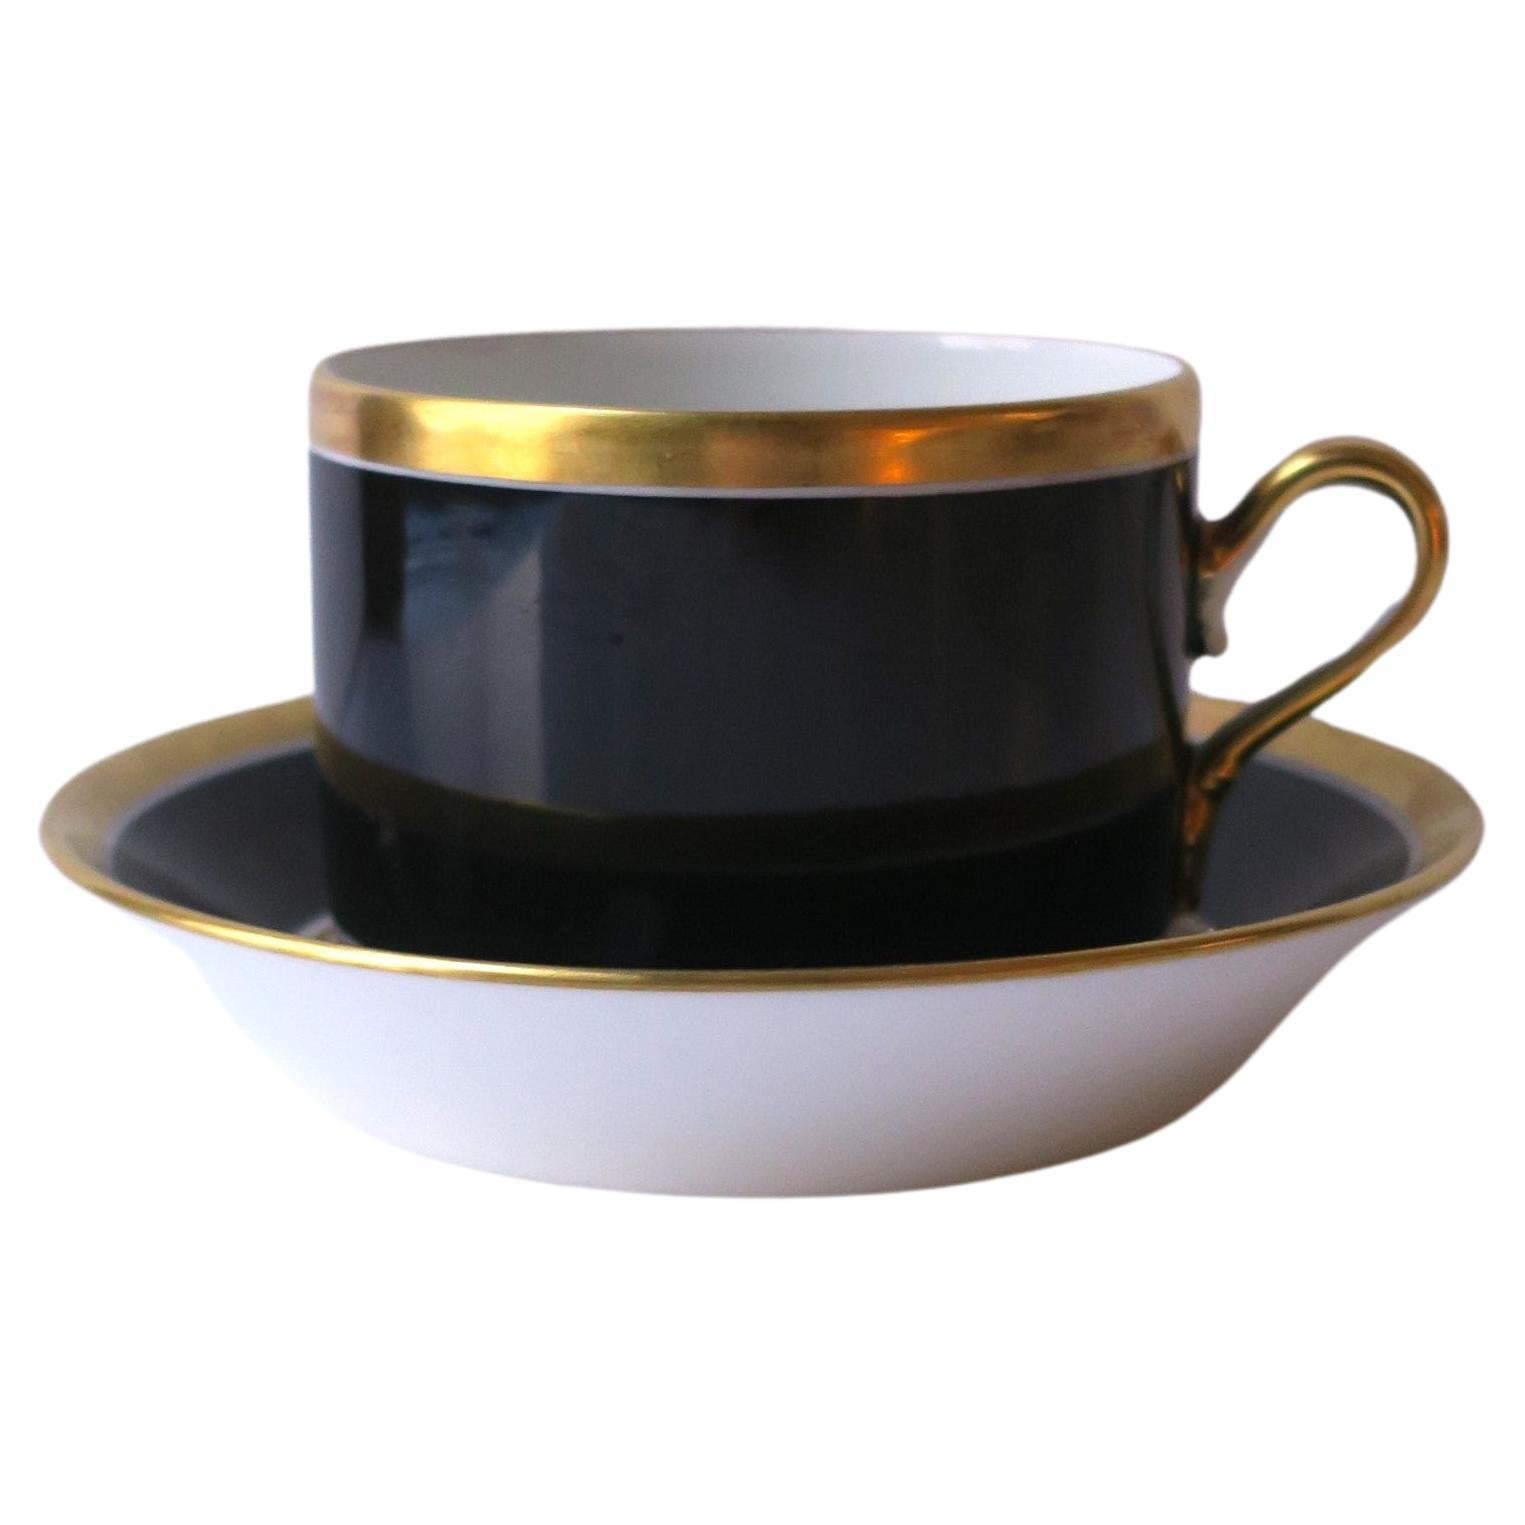 What is the plate under a tea cup called?